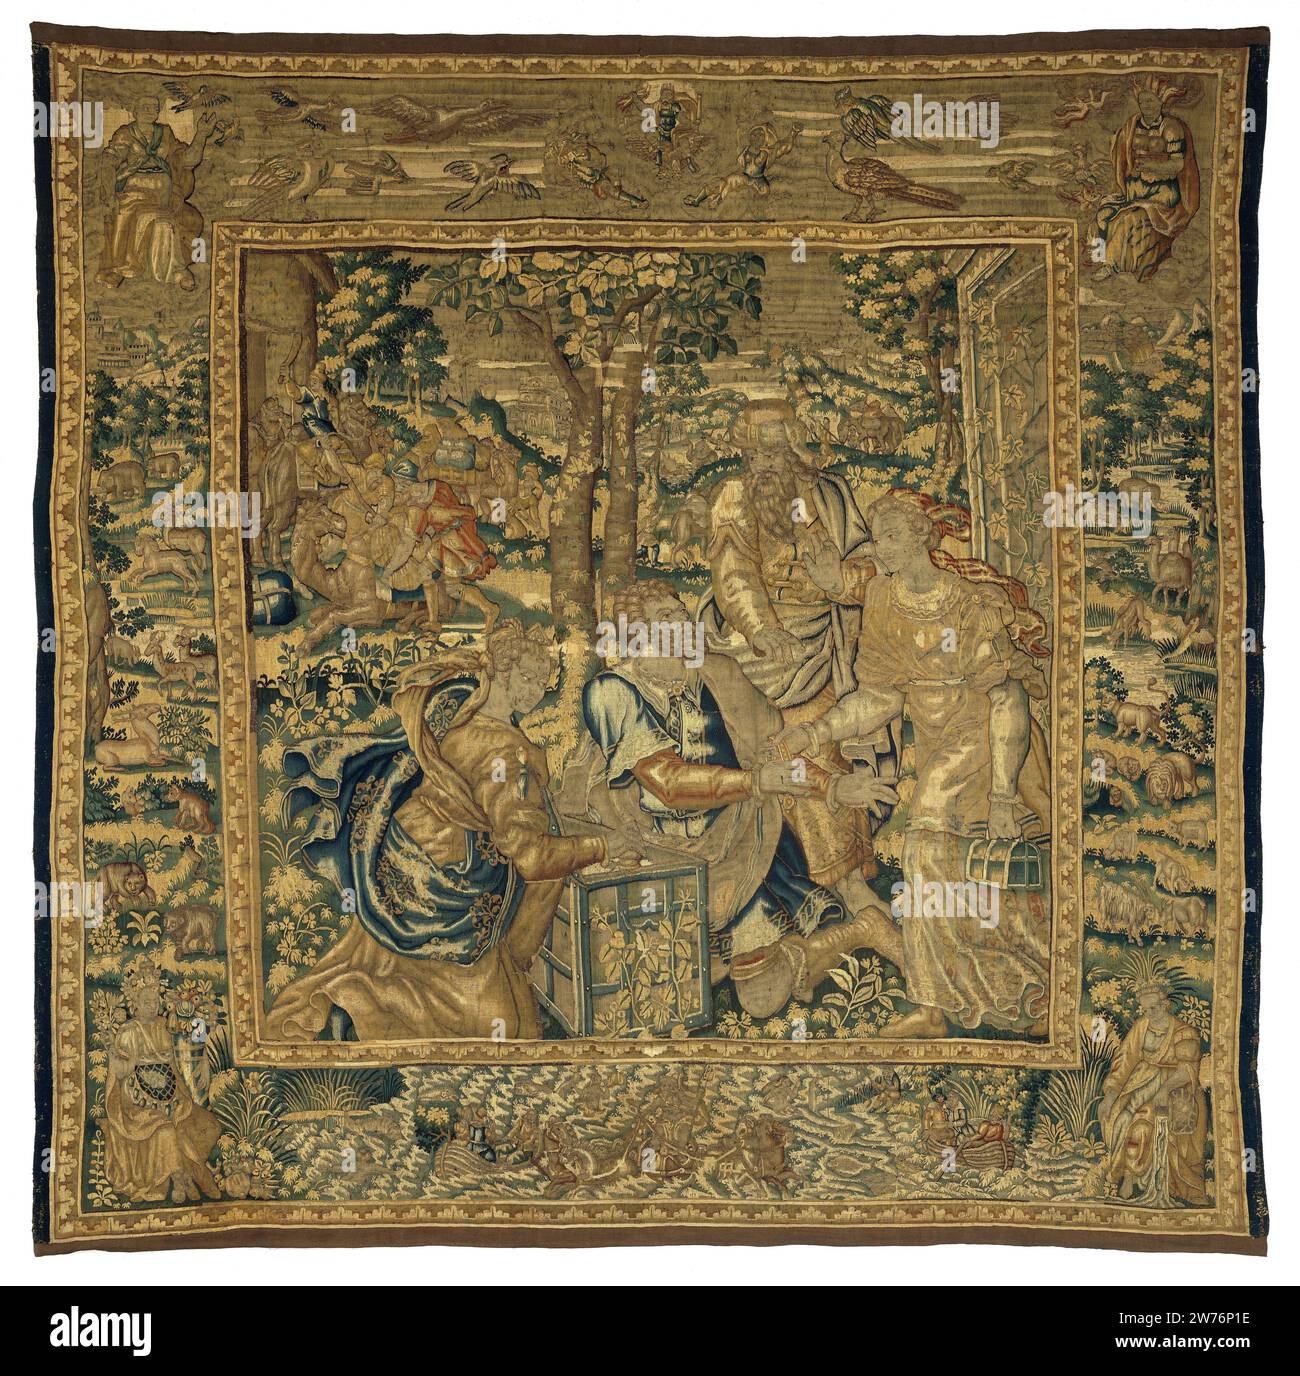 Eliezer hands gifts to Rebekka, Anonymous, c. 1575 - c. 1600 Wall carpet with Eliezer and Rebecca's mother who ask Rebecca to follow Eliezer (Gen. 24:58), from a series of tapestries with the history of Rebecca and Eliezer (Gen.24) with edges with animals and the four elements in the corners; With the weaver brand of Willem de Kempenere. Brussels Ketting: Wool. Entry: Wool. Entry: Silk tapestry Wall carpet with Eliezer and Rebecca's mother who ask Rebecca to follow Eliezer (Gen. 24:58), from a series of tapestries with the history of Rebecca and Eliezer (Gen.24) with edges with animals and the Stock Photo